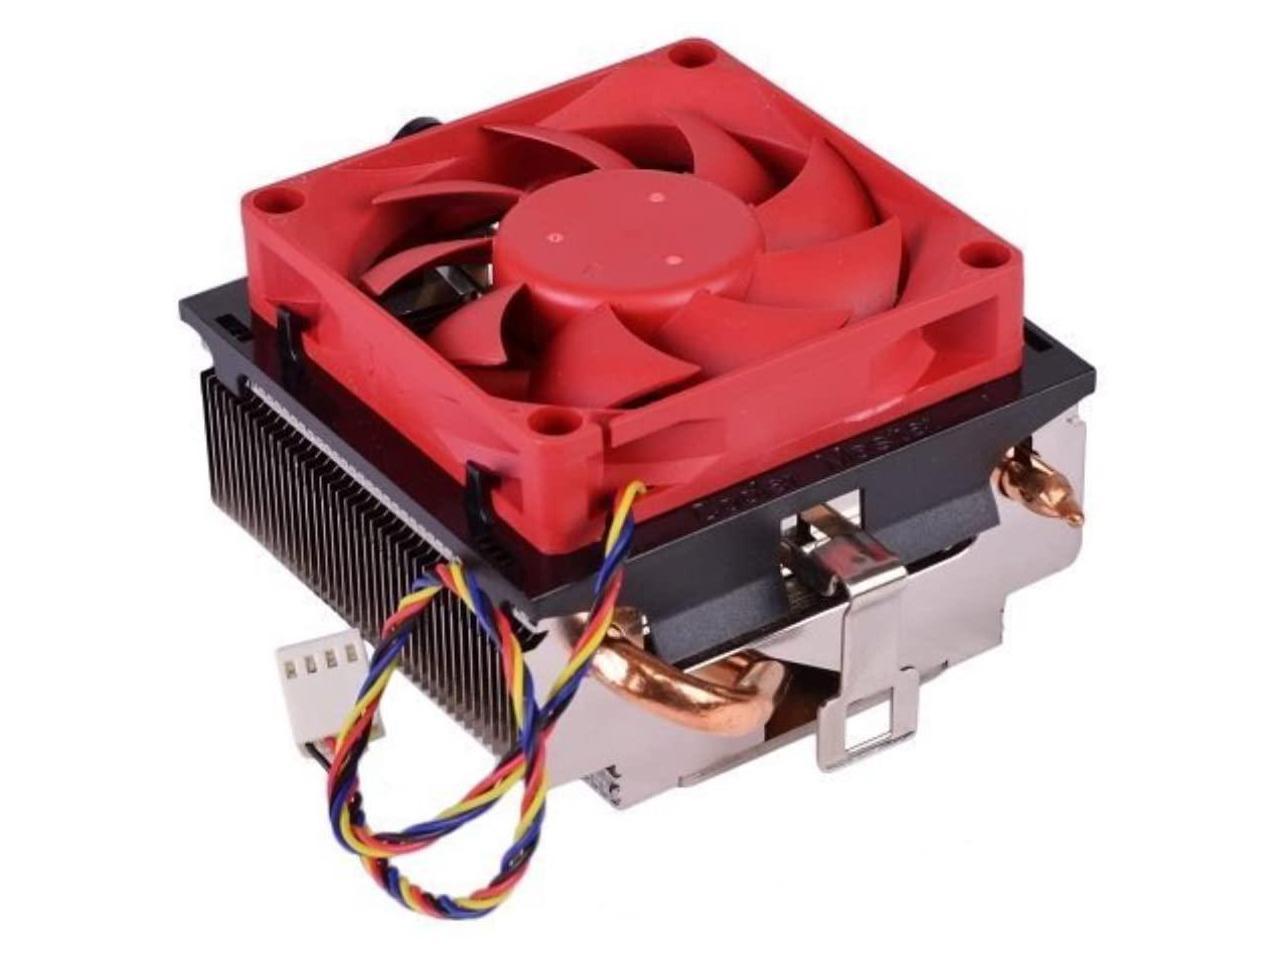 AM3 TS78 AMD Wraith Socket FM2 AM2 4-Pin Connector CPU Cooler with Copper Core Base/Heatpipes & Aluminum Heatsink & 3.62-Inch Fan with Pre-Applied Thermal Paste for Desktop PC Computer FM1 